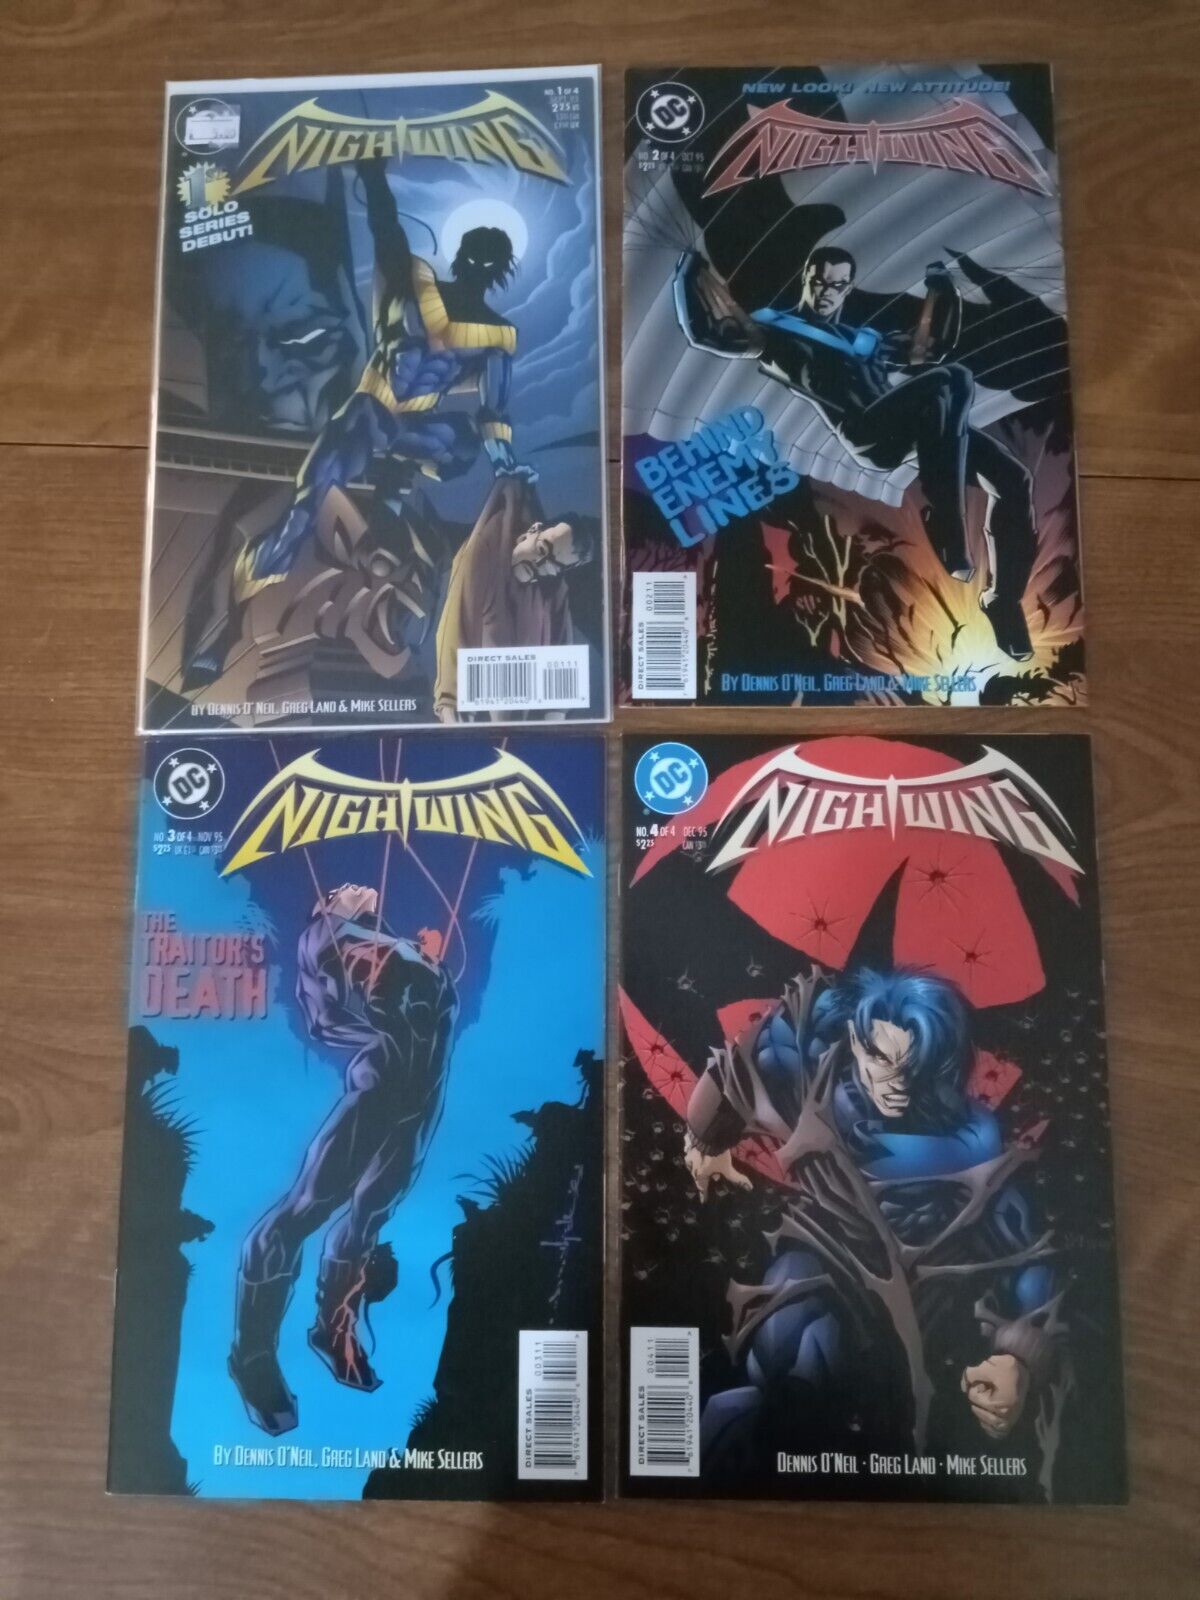 NIGHTWING 1-4 12 3 4 (1995) Vol 1, Solo Dick Grayson, Complete Series